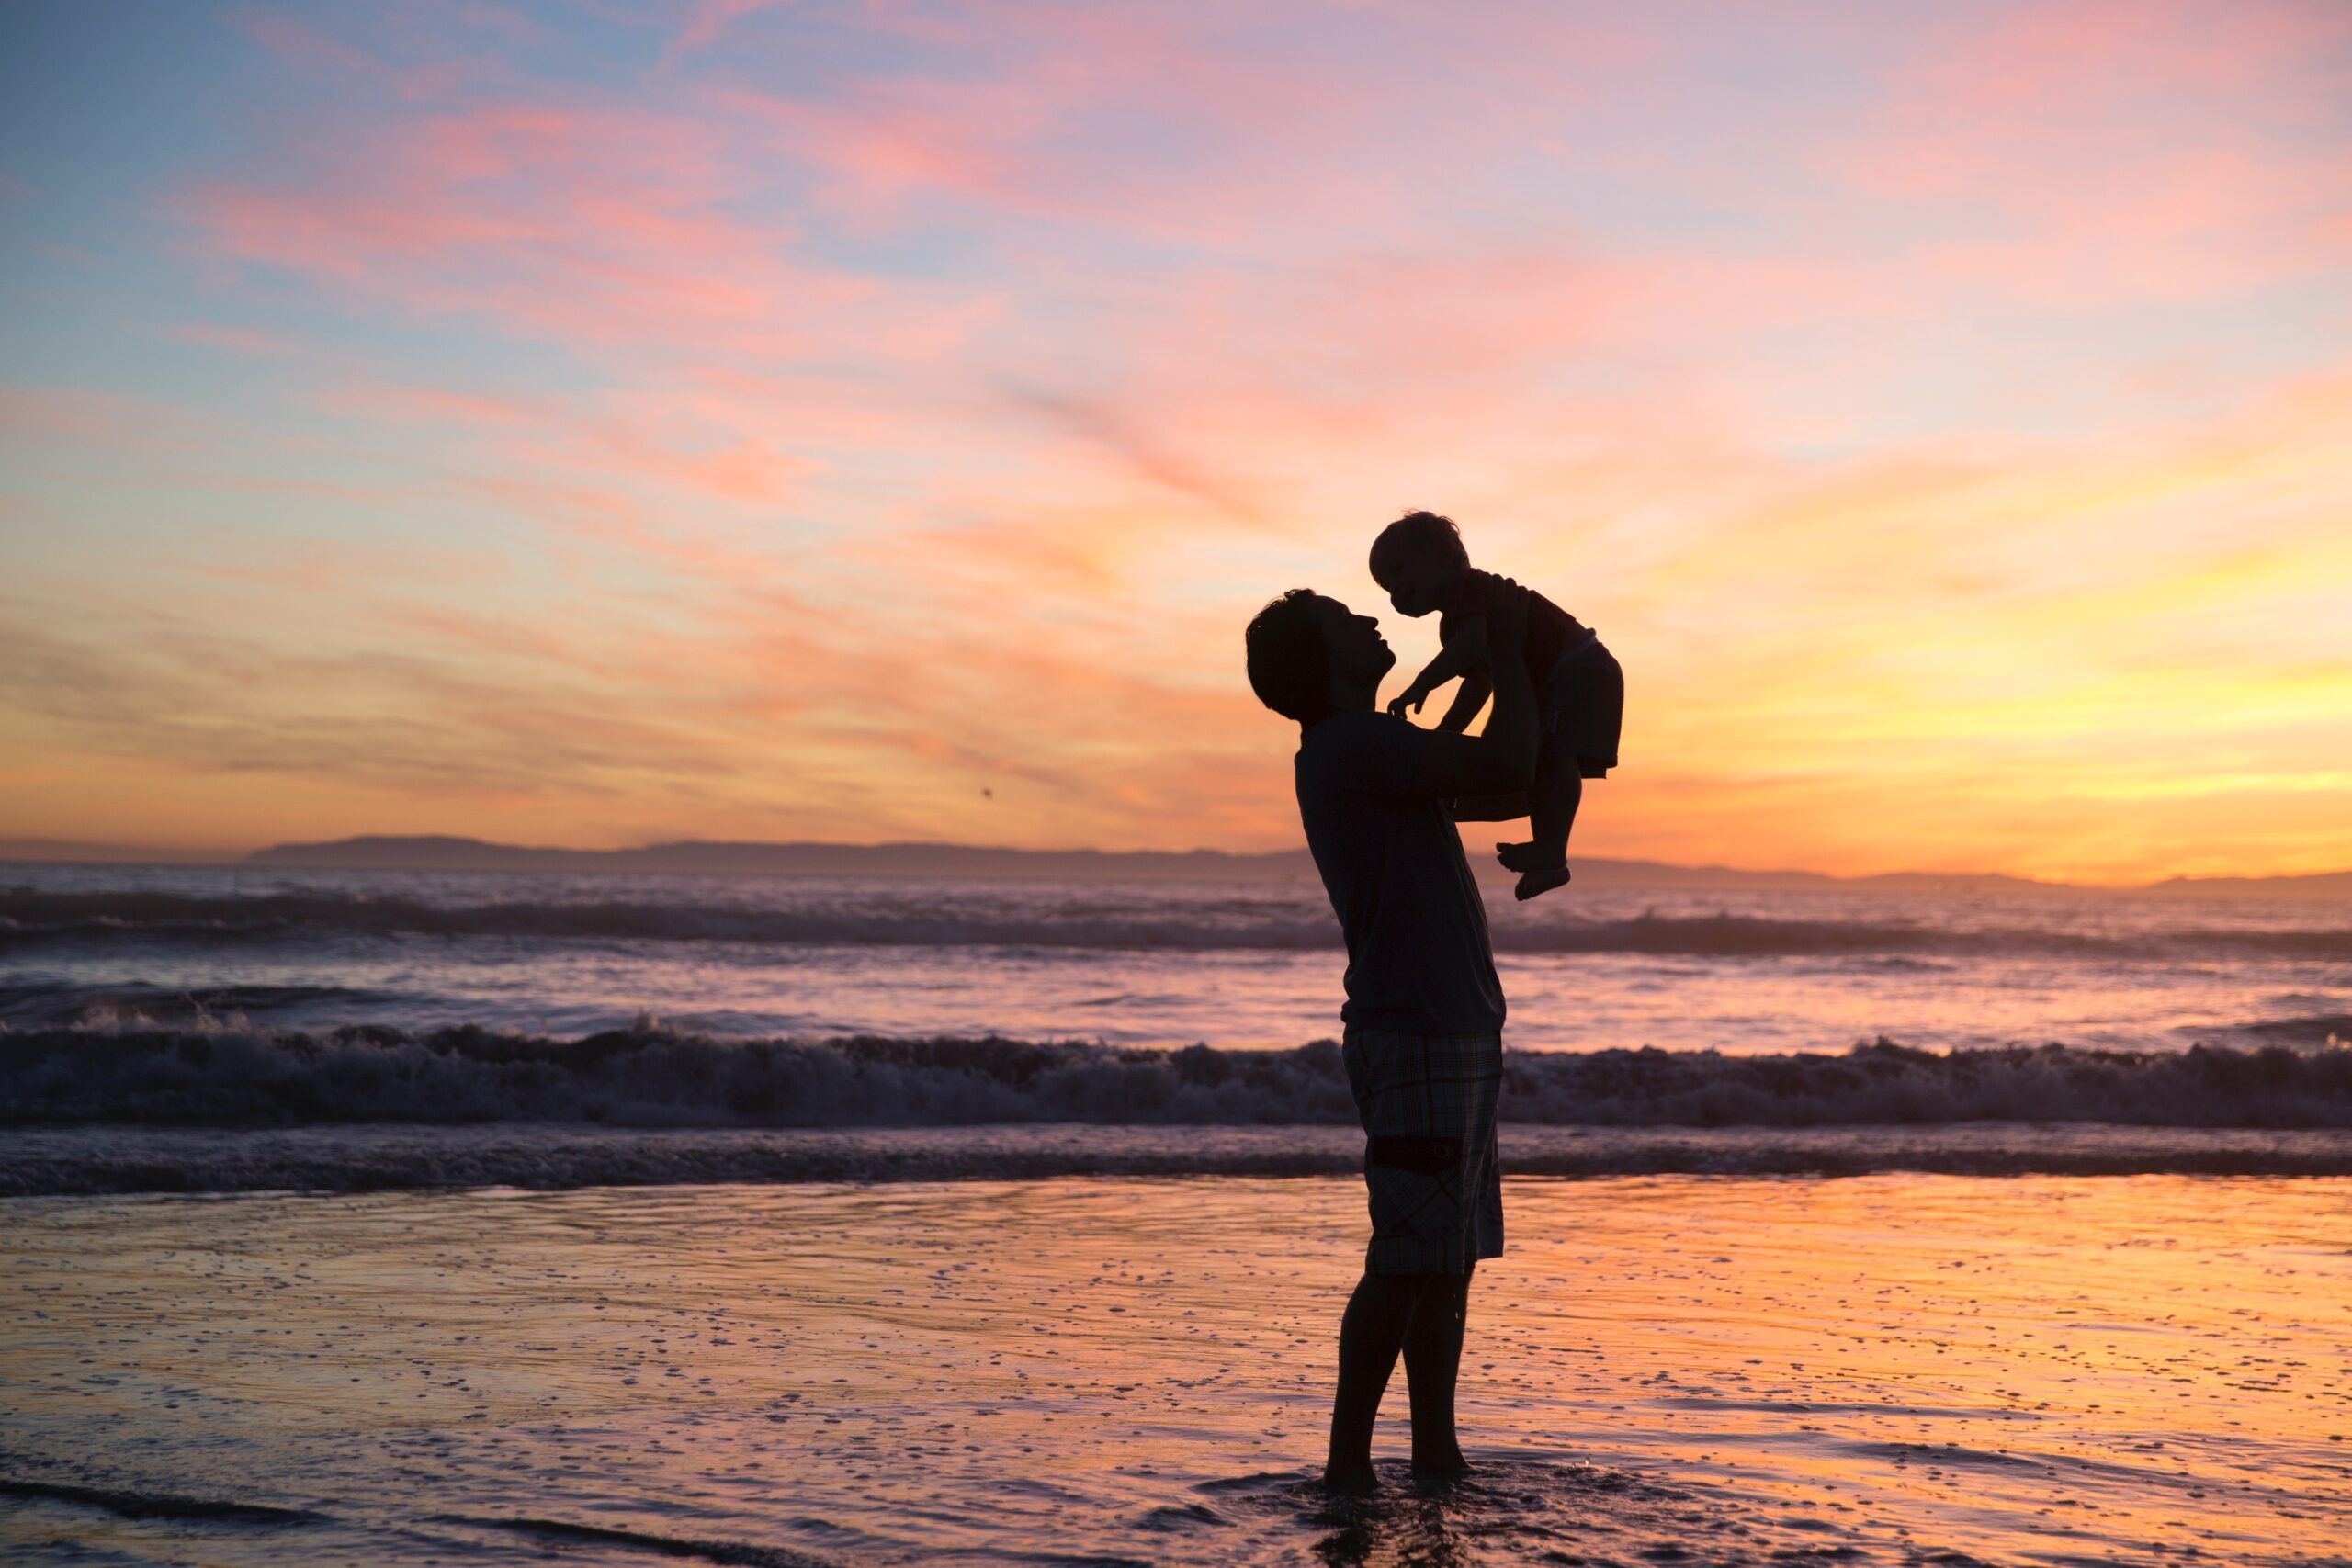 A father holding a toddler on a beach at sunset